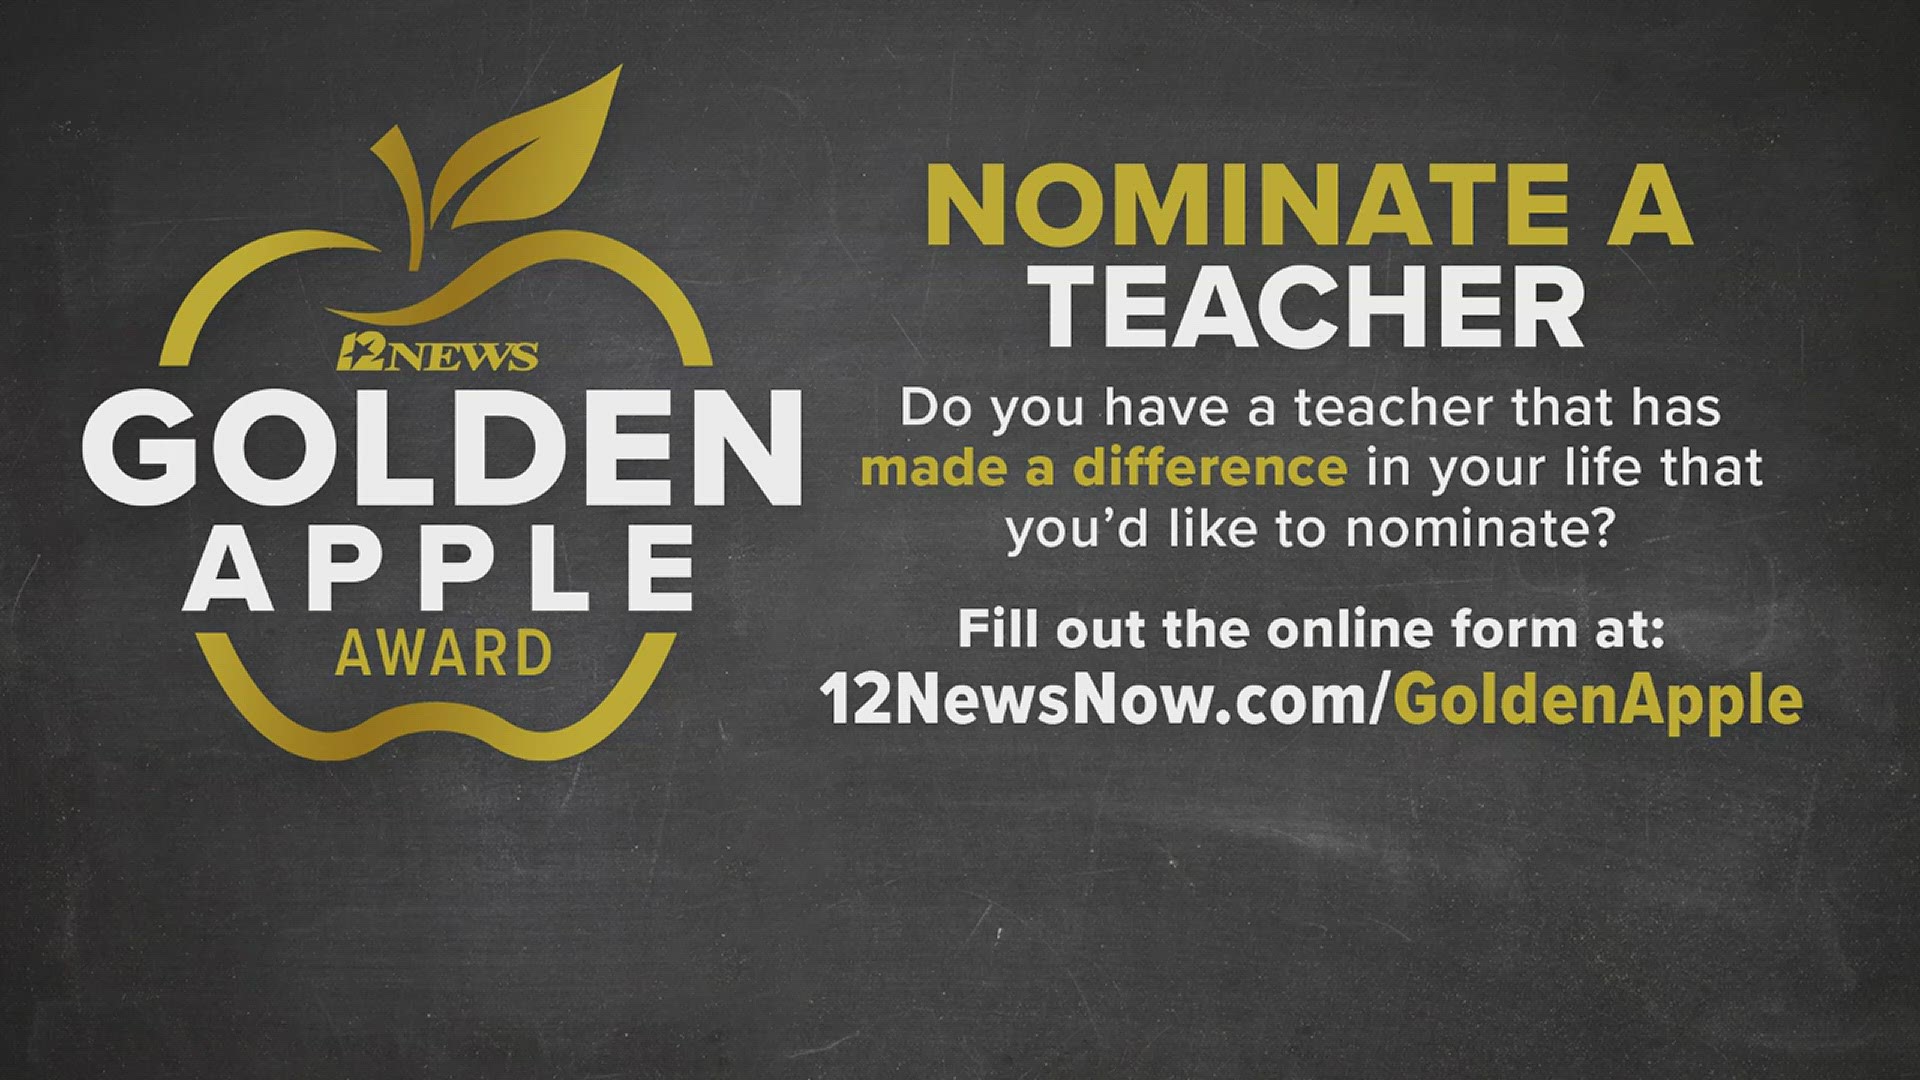 Every school year we hear about teachers who go above and beyond for their students and the 12News Daybreak team needs your help to recognize some of them.